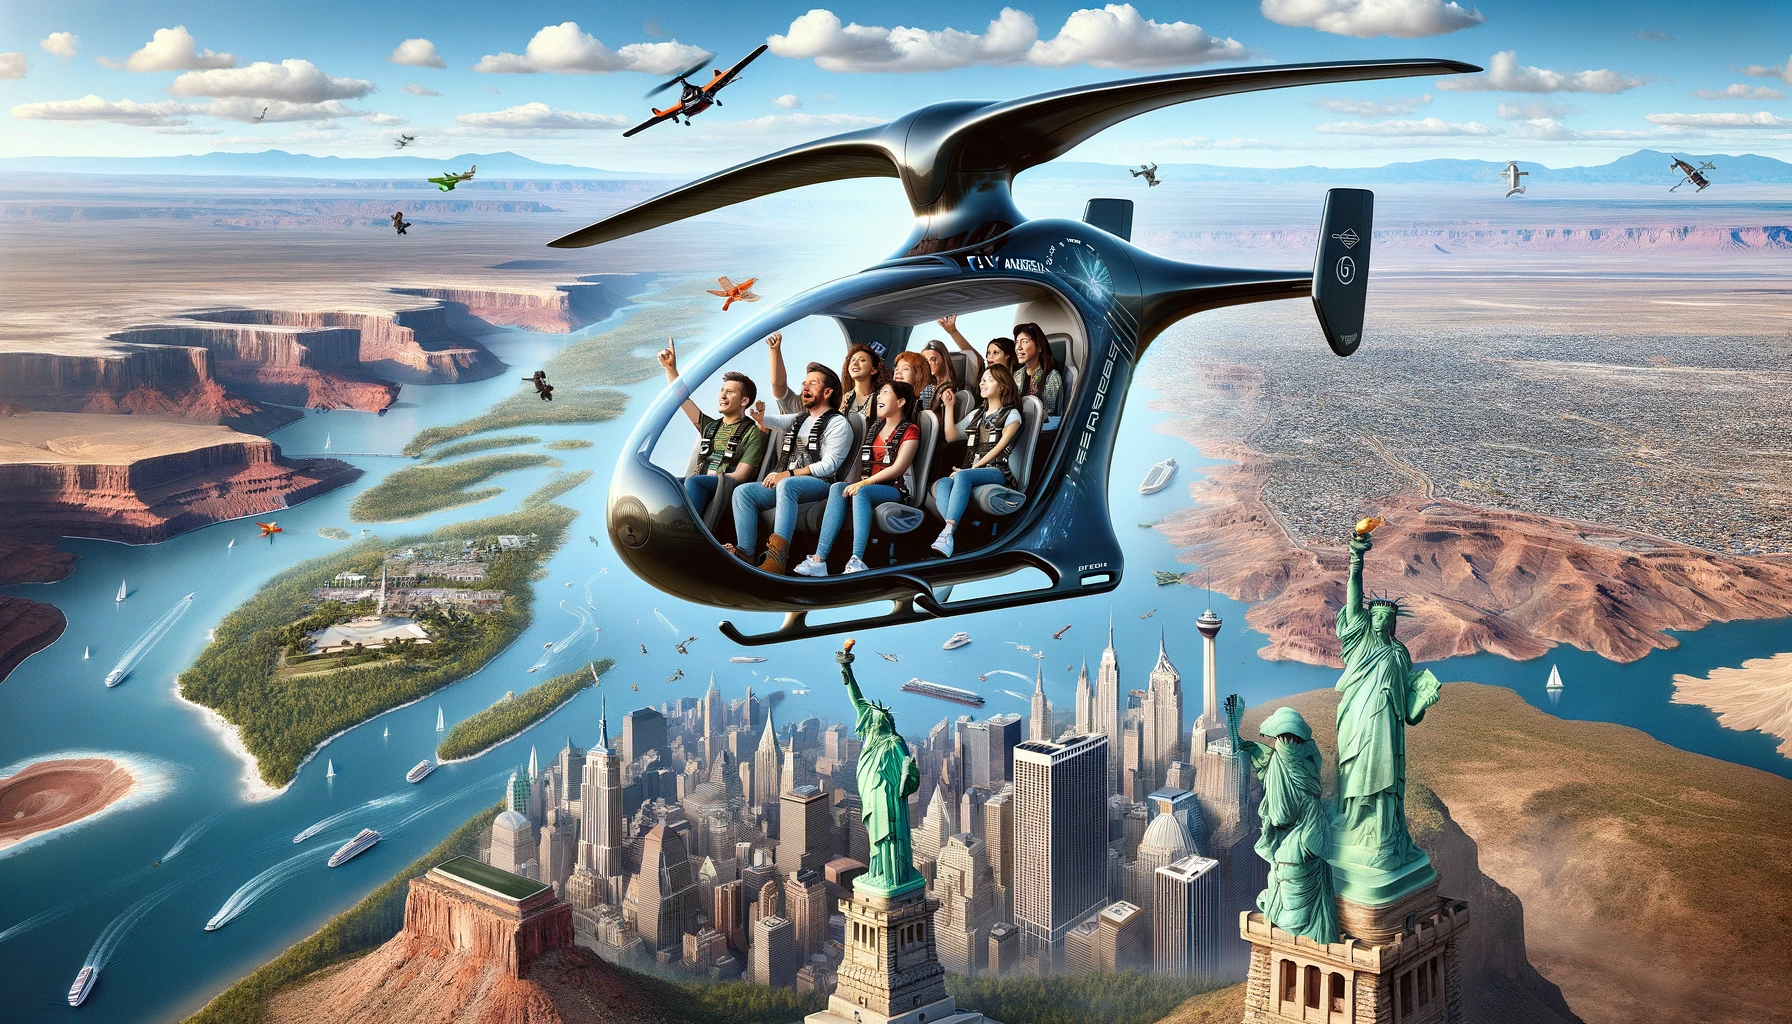 A small group of tourists in a futuristic flying vehicle, soaring above American landmarks like the Grand Canyon and Statue of Liberty, under a clear sky with fluffy clouds.